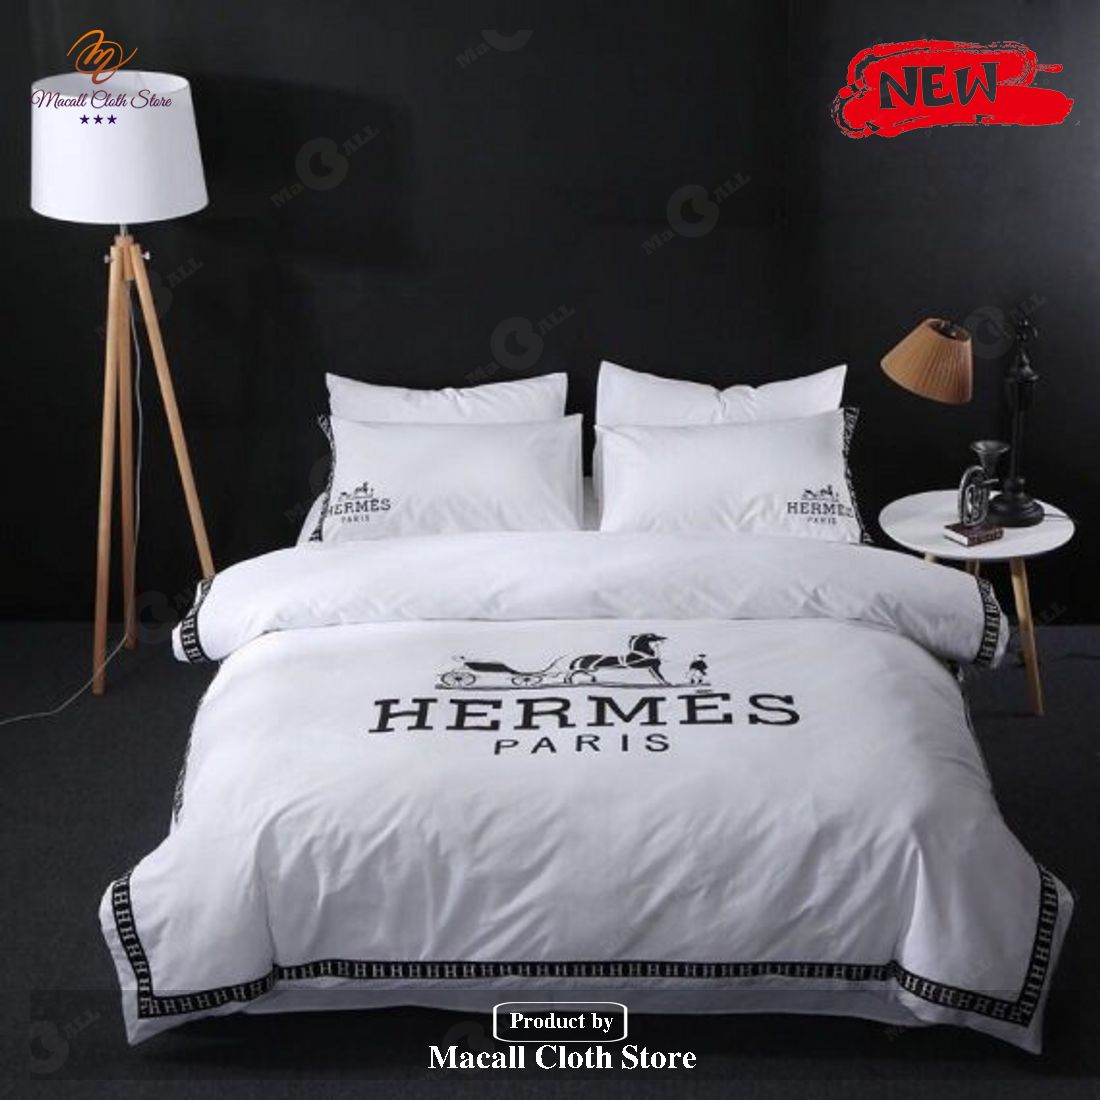 Hermes Paris Luxury Brand Type 76 Bedding Sets - Macall Cloth Store ...